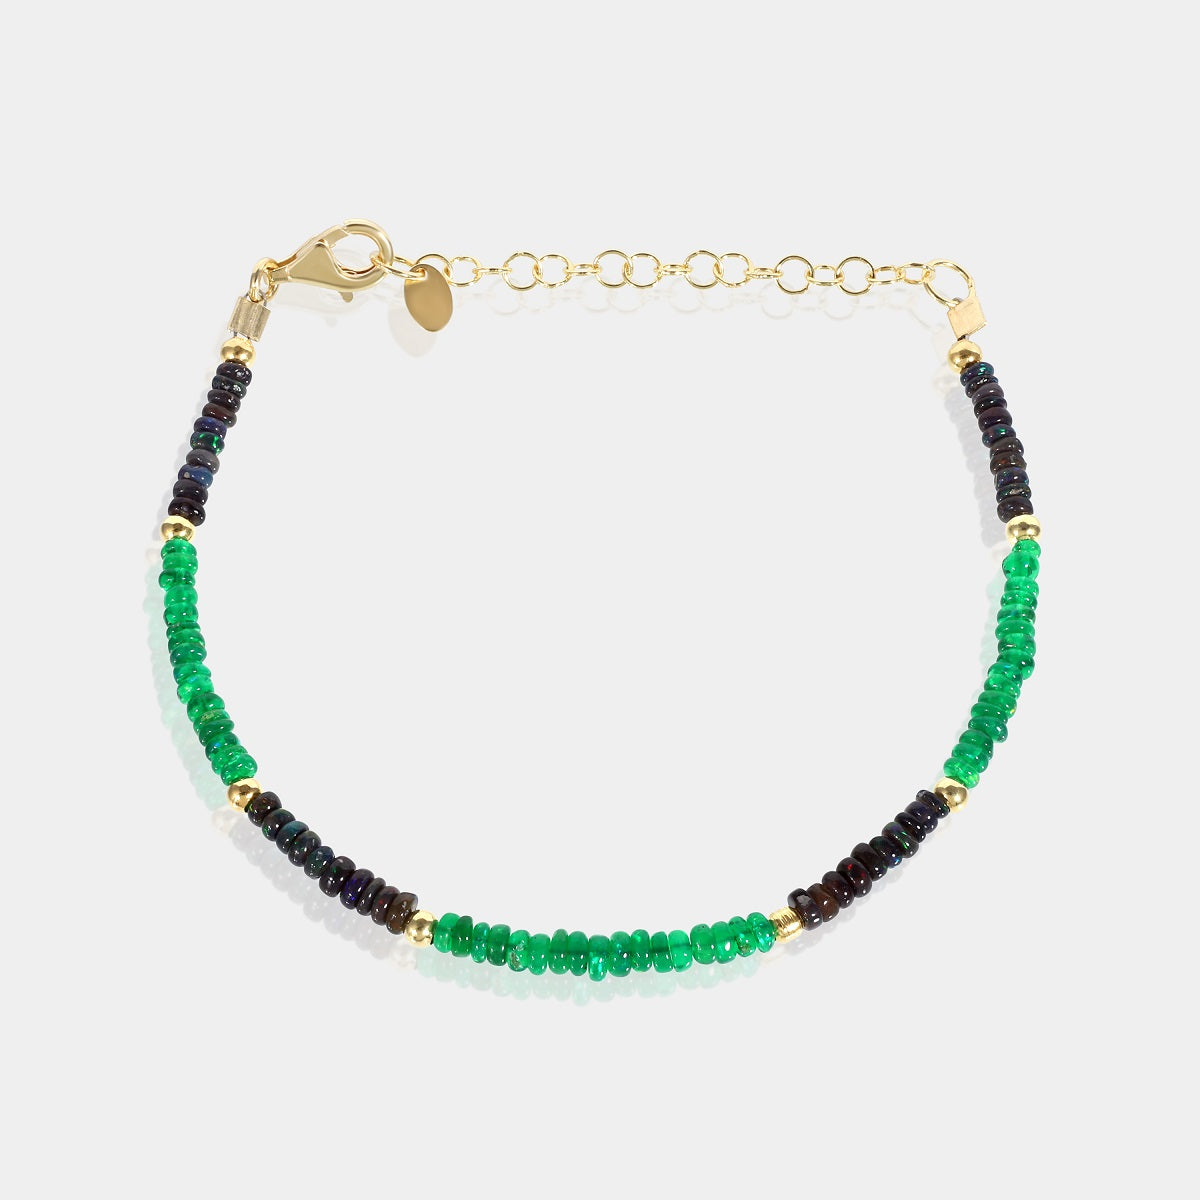 Gemstone Beads Bracelet with Green and Black Ethiopian Opals